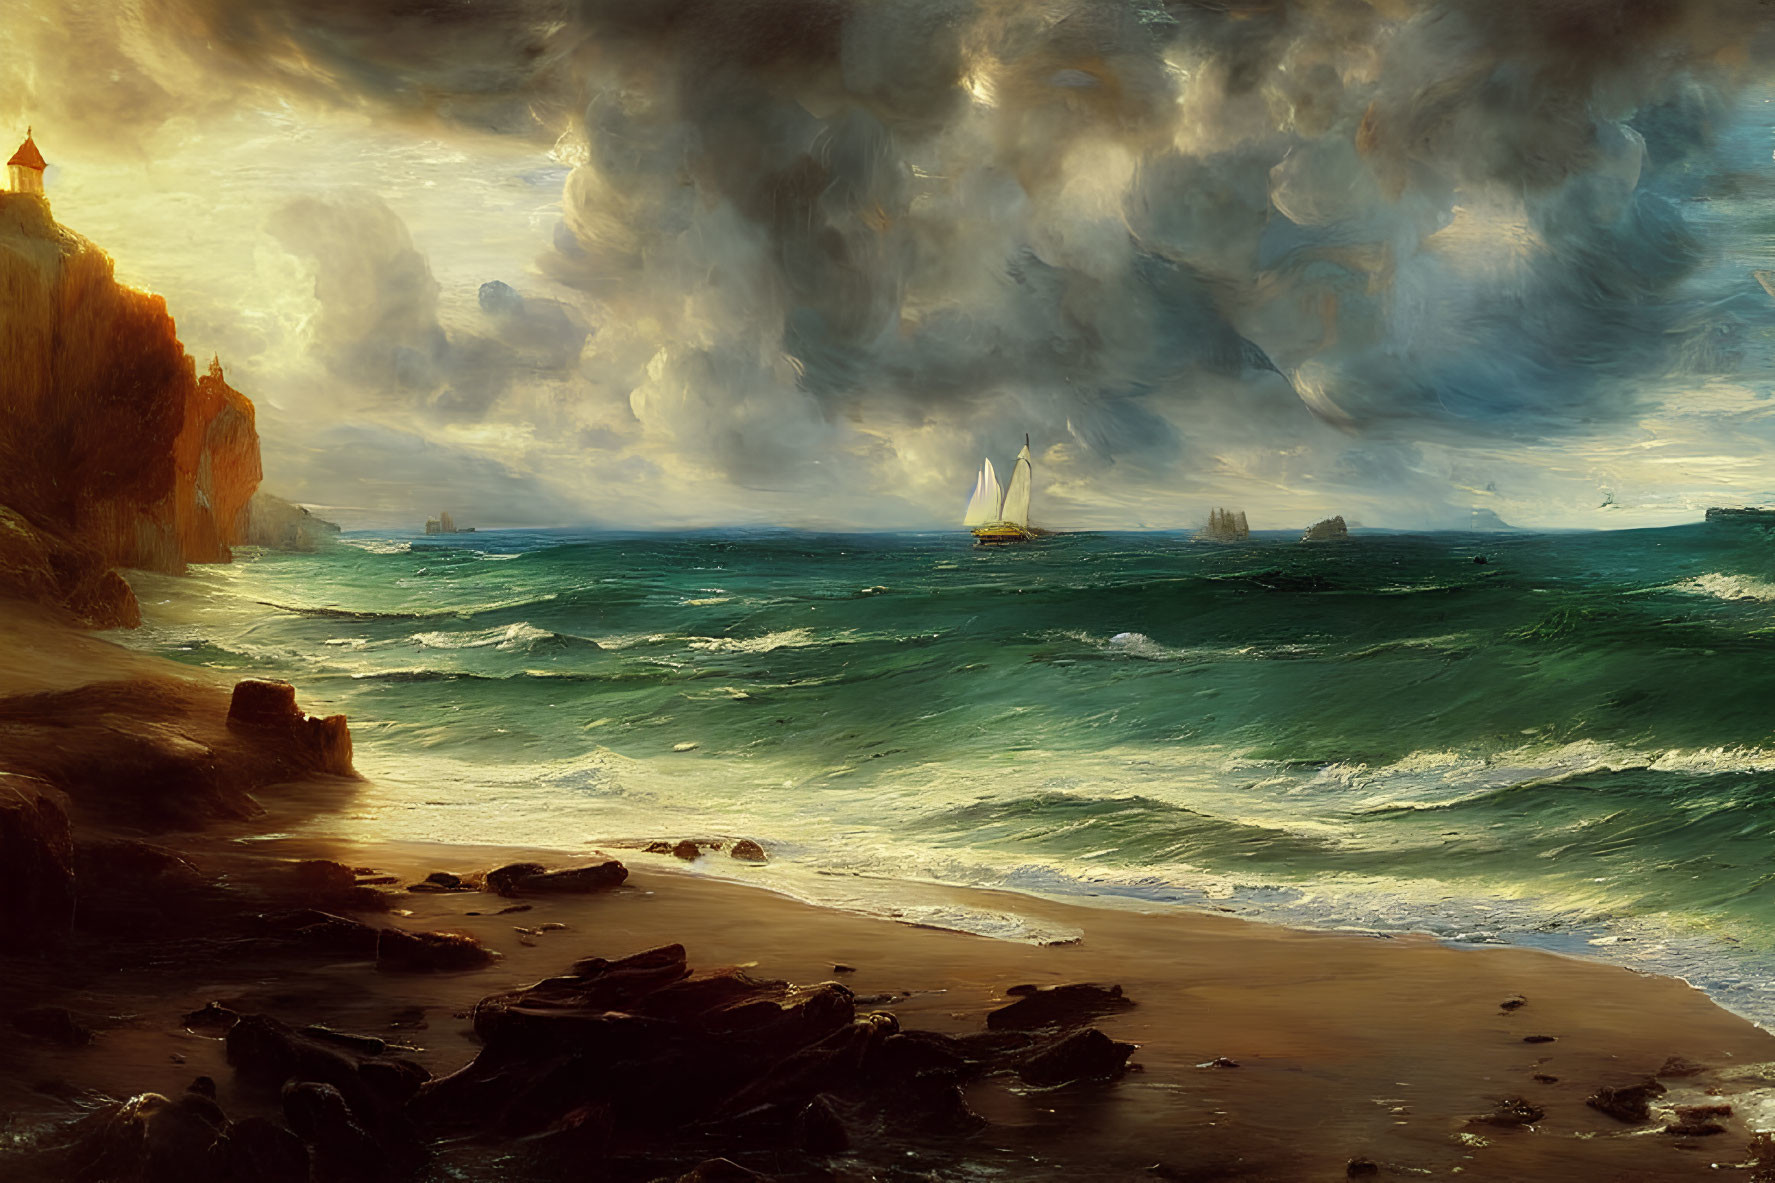 Stormy Seascape Painting with Green Waves, Ships, and Lighthouse